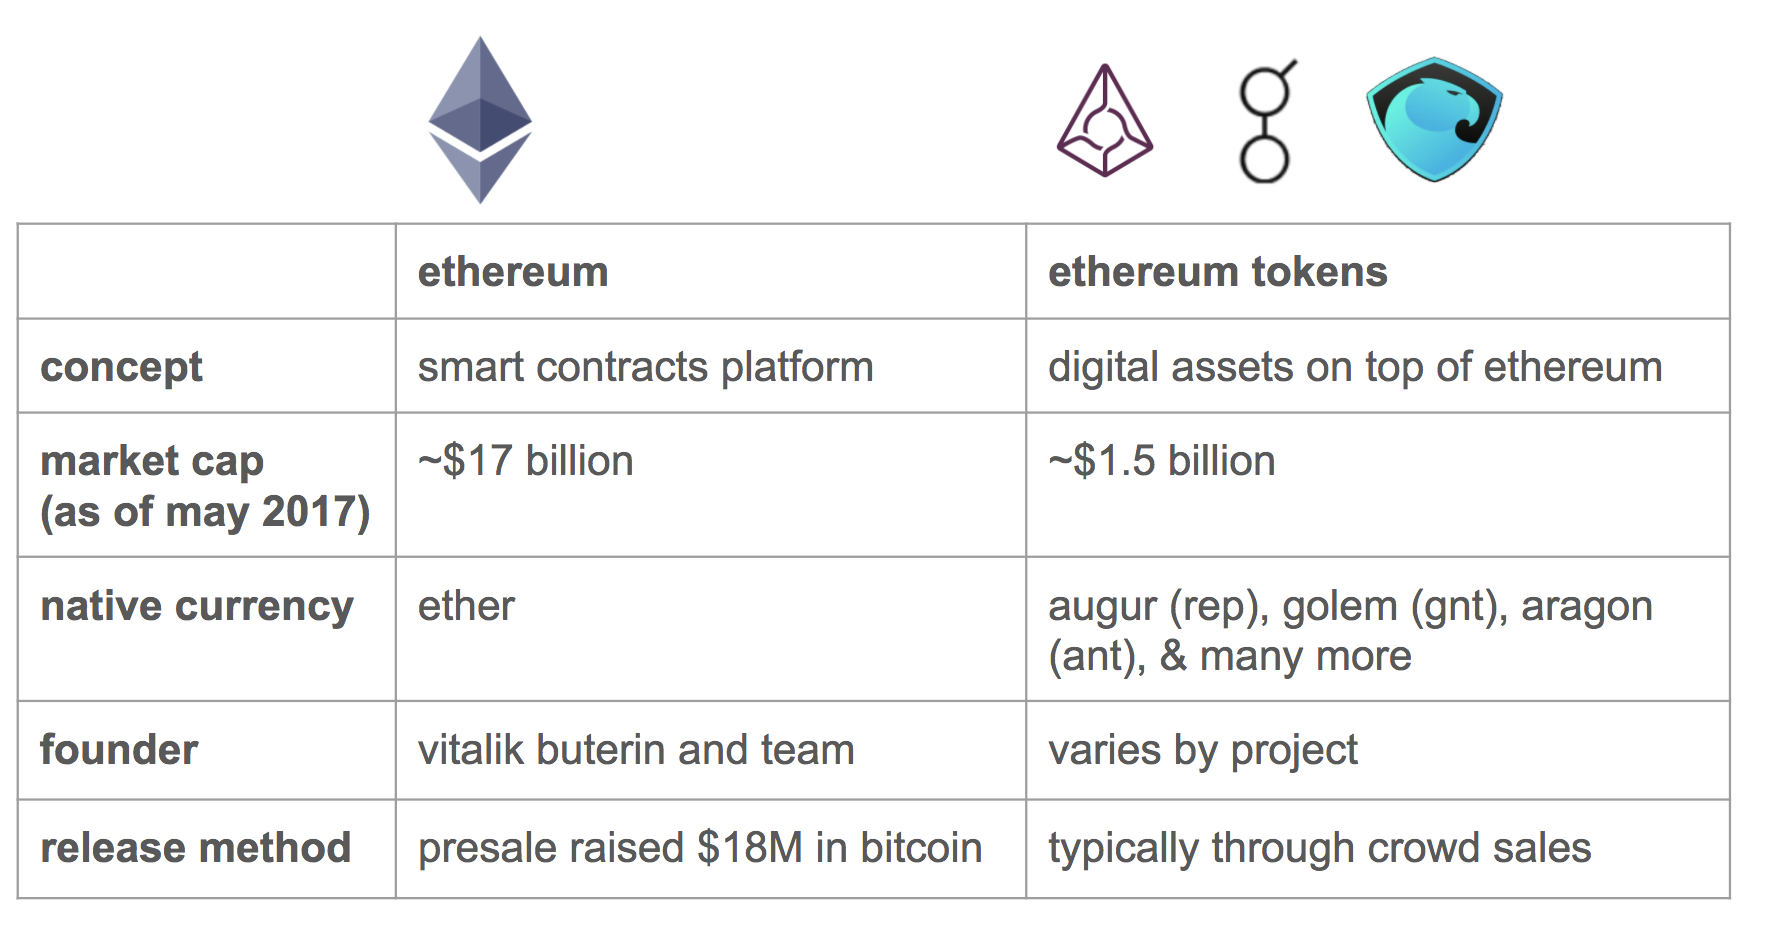 is an ethereum token worth one ether